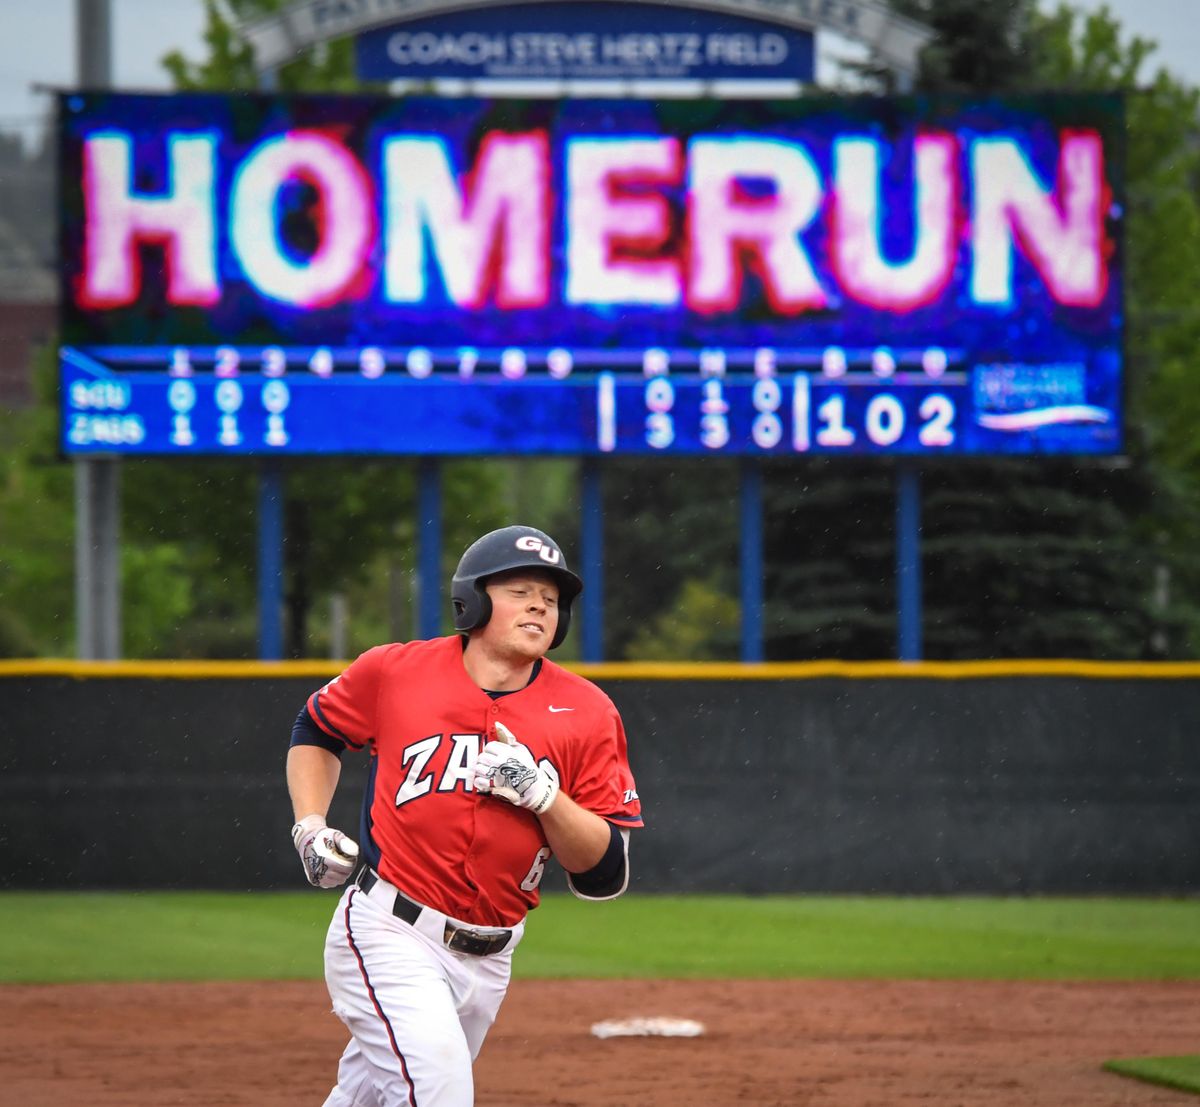 Gonzaga shortstop Gunnar Schubert trots around the bases after hitting a home run in the third inning against Santa Clara on May 18, 2018, at Patterson Baseball Complex. (Dan Pelle / The Spokesman-Review)